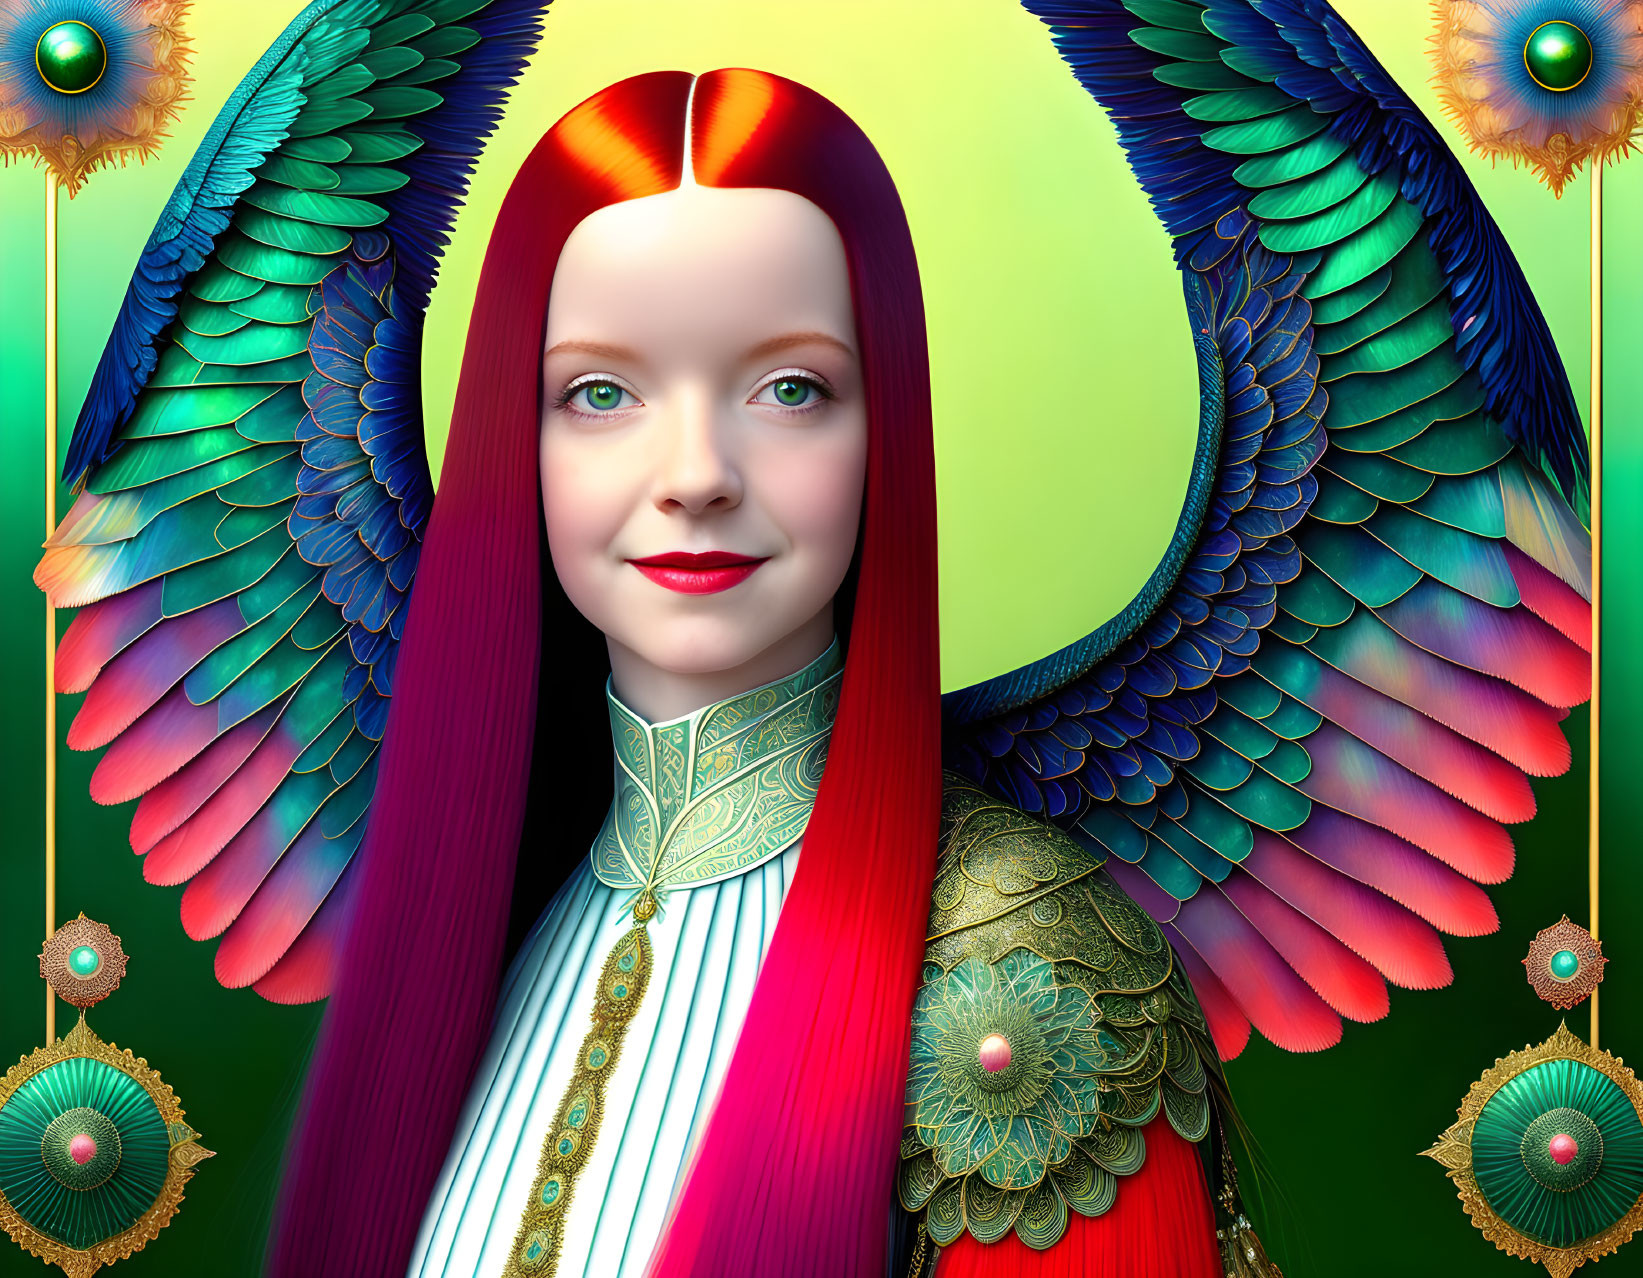 Vibrant digital artwork of female figure with colorful wings and intricate armor